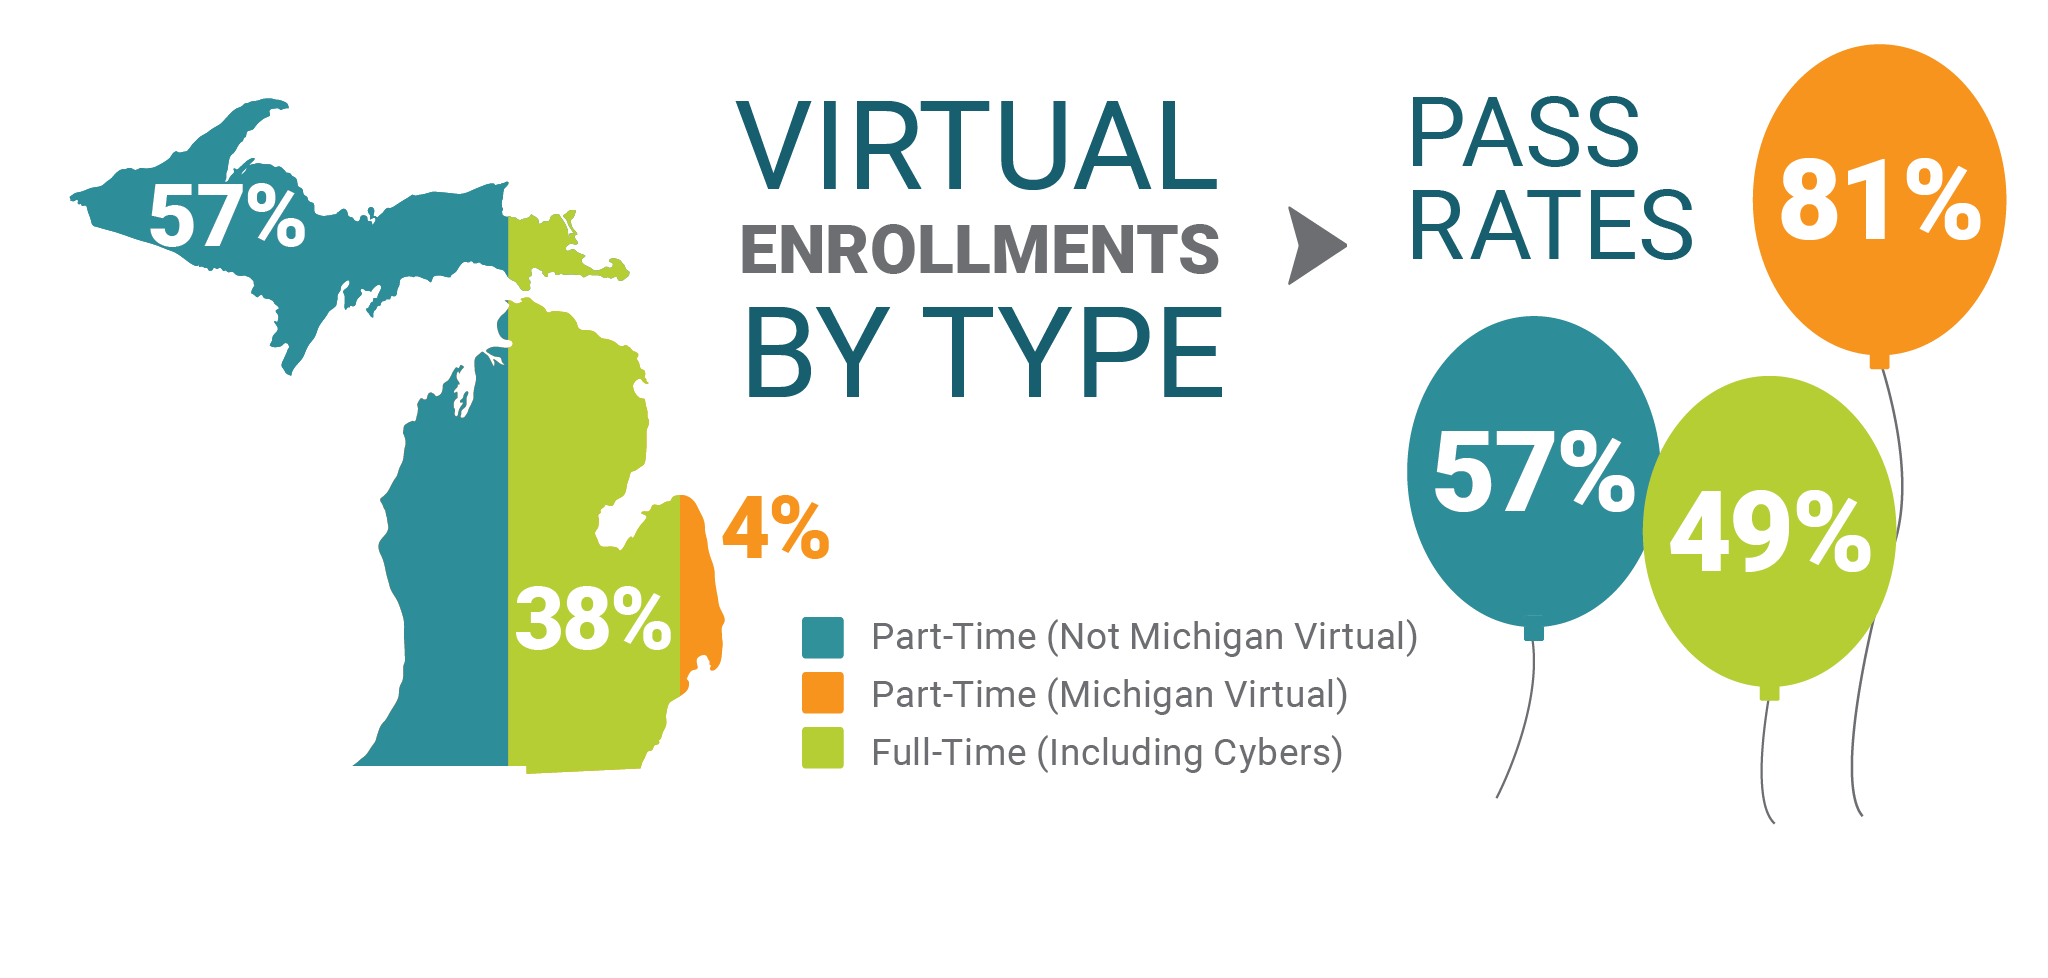 Virtual Enrollments By Type. 57% of virtual enrollments come from part-time (not Michigan Virtual Schools). 38 percent of virtual enrollments come from full-time virtual schools (including cybers), and 4 percent come from part-time Michigan Virtual courses. While full-time online schools have an average pass rate of 49 percent, part-time (not Michigan Virtual schools) have a pass rate of 57 percent. Michigan Virtual part-time students have a pass rate of 81 percent.